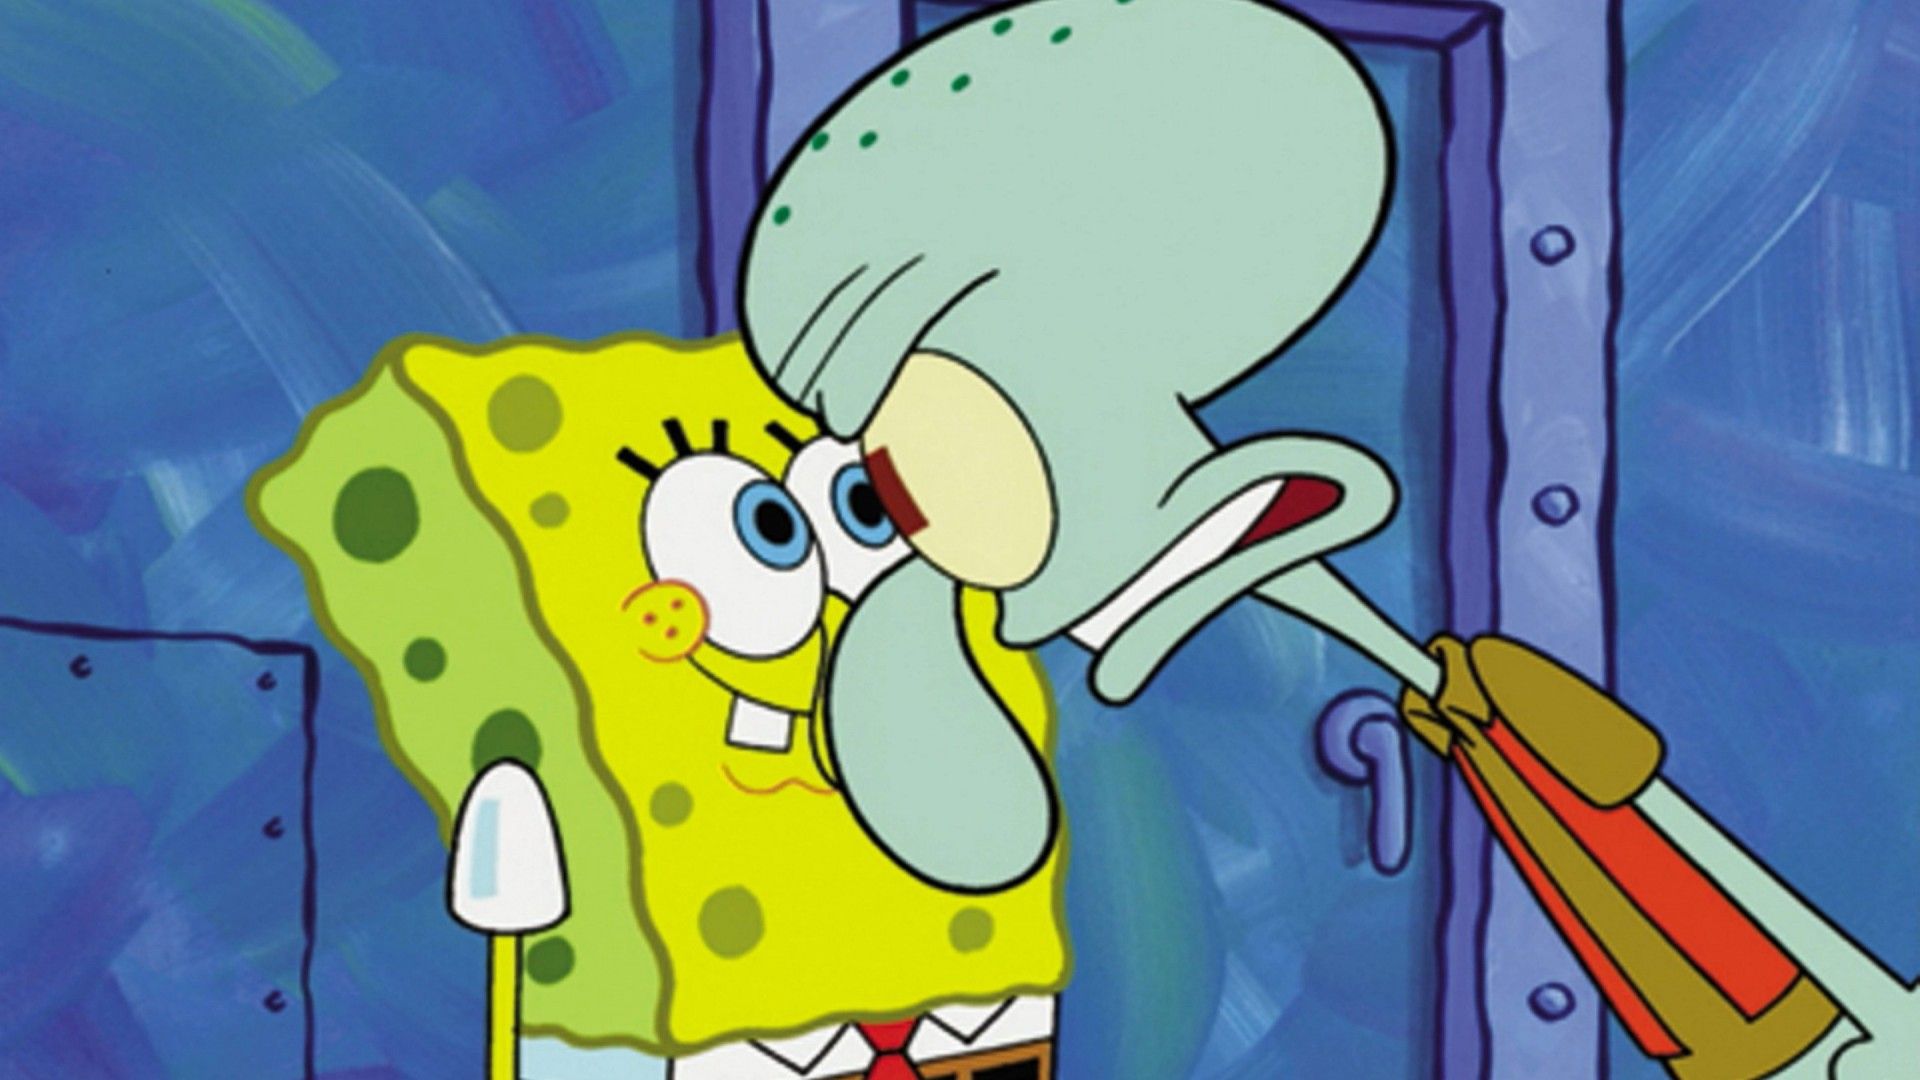 A cartoon character is looking at another - Squidward